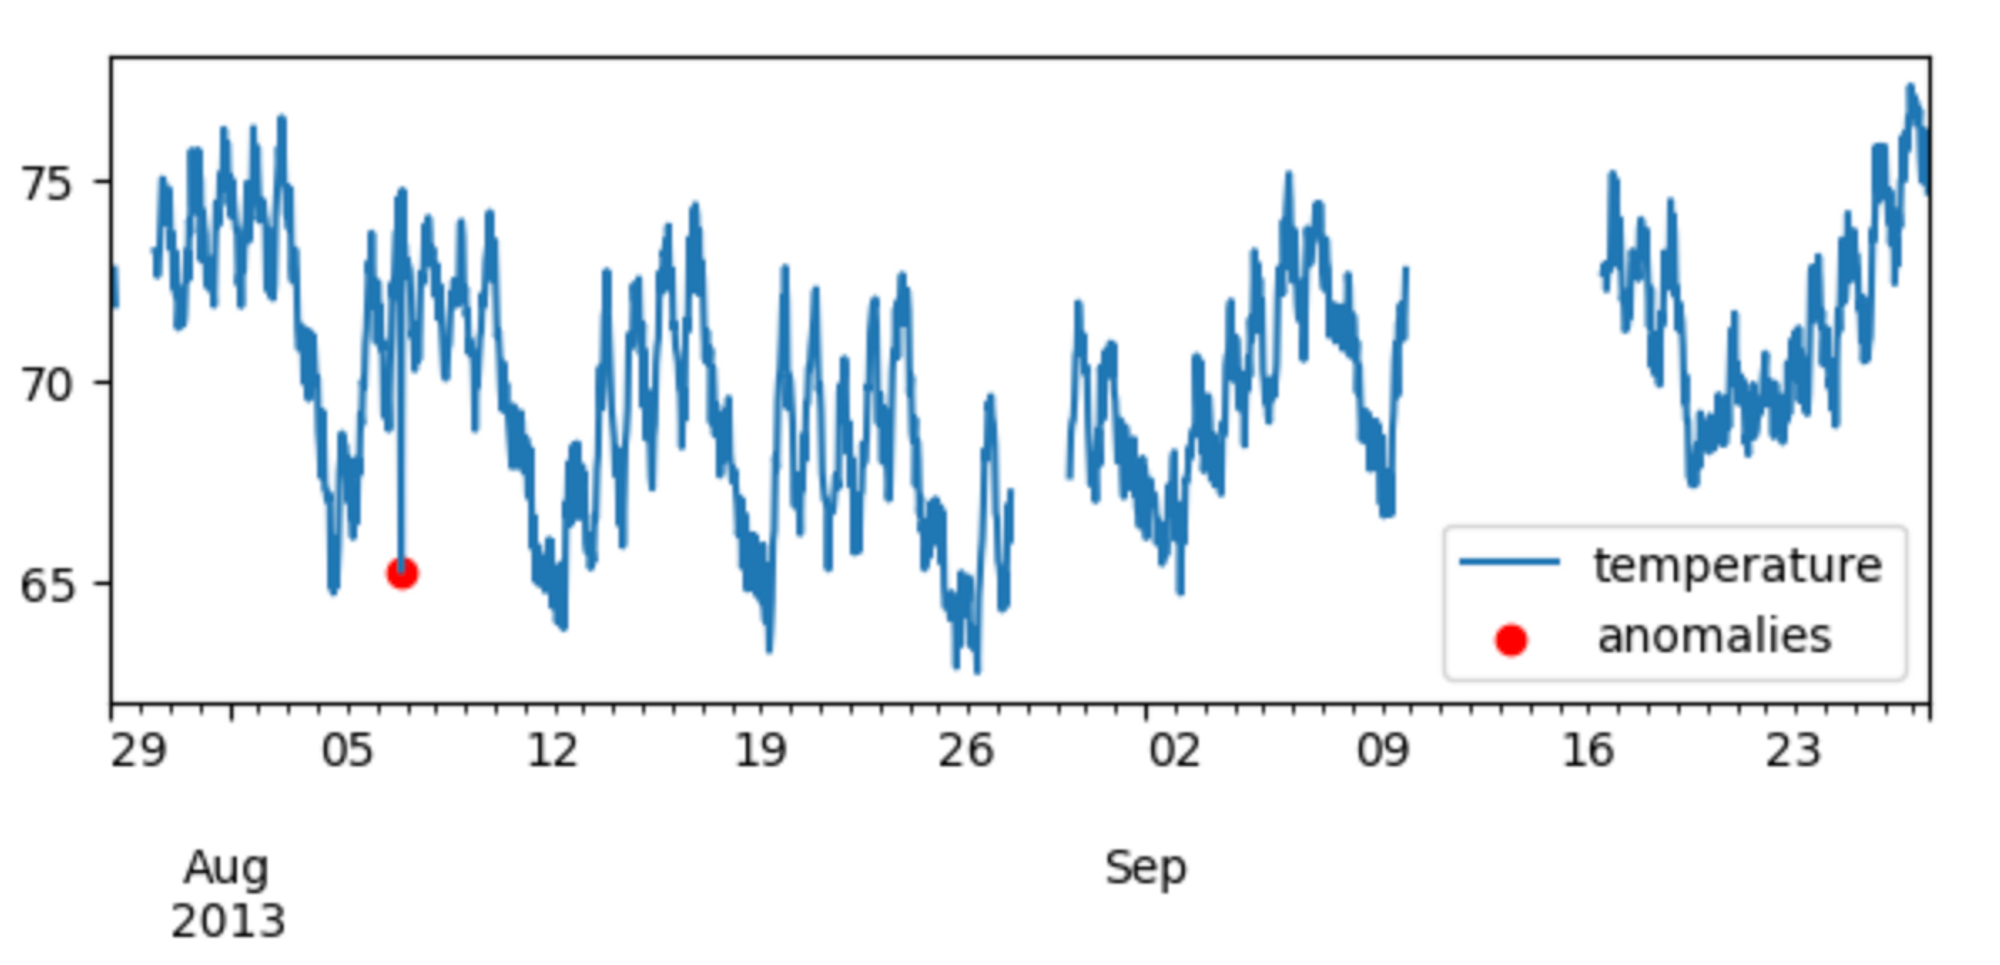 Refined Anomaly Detection